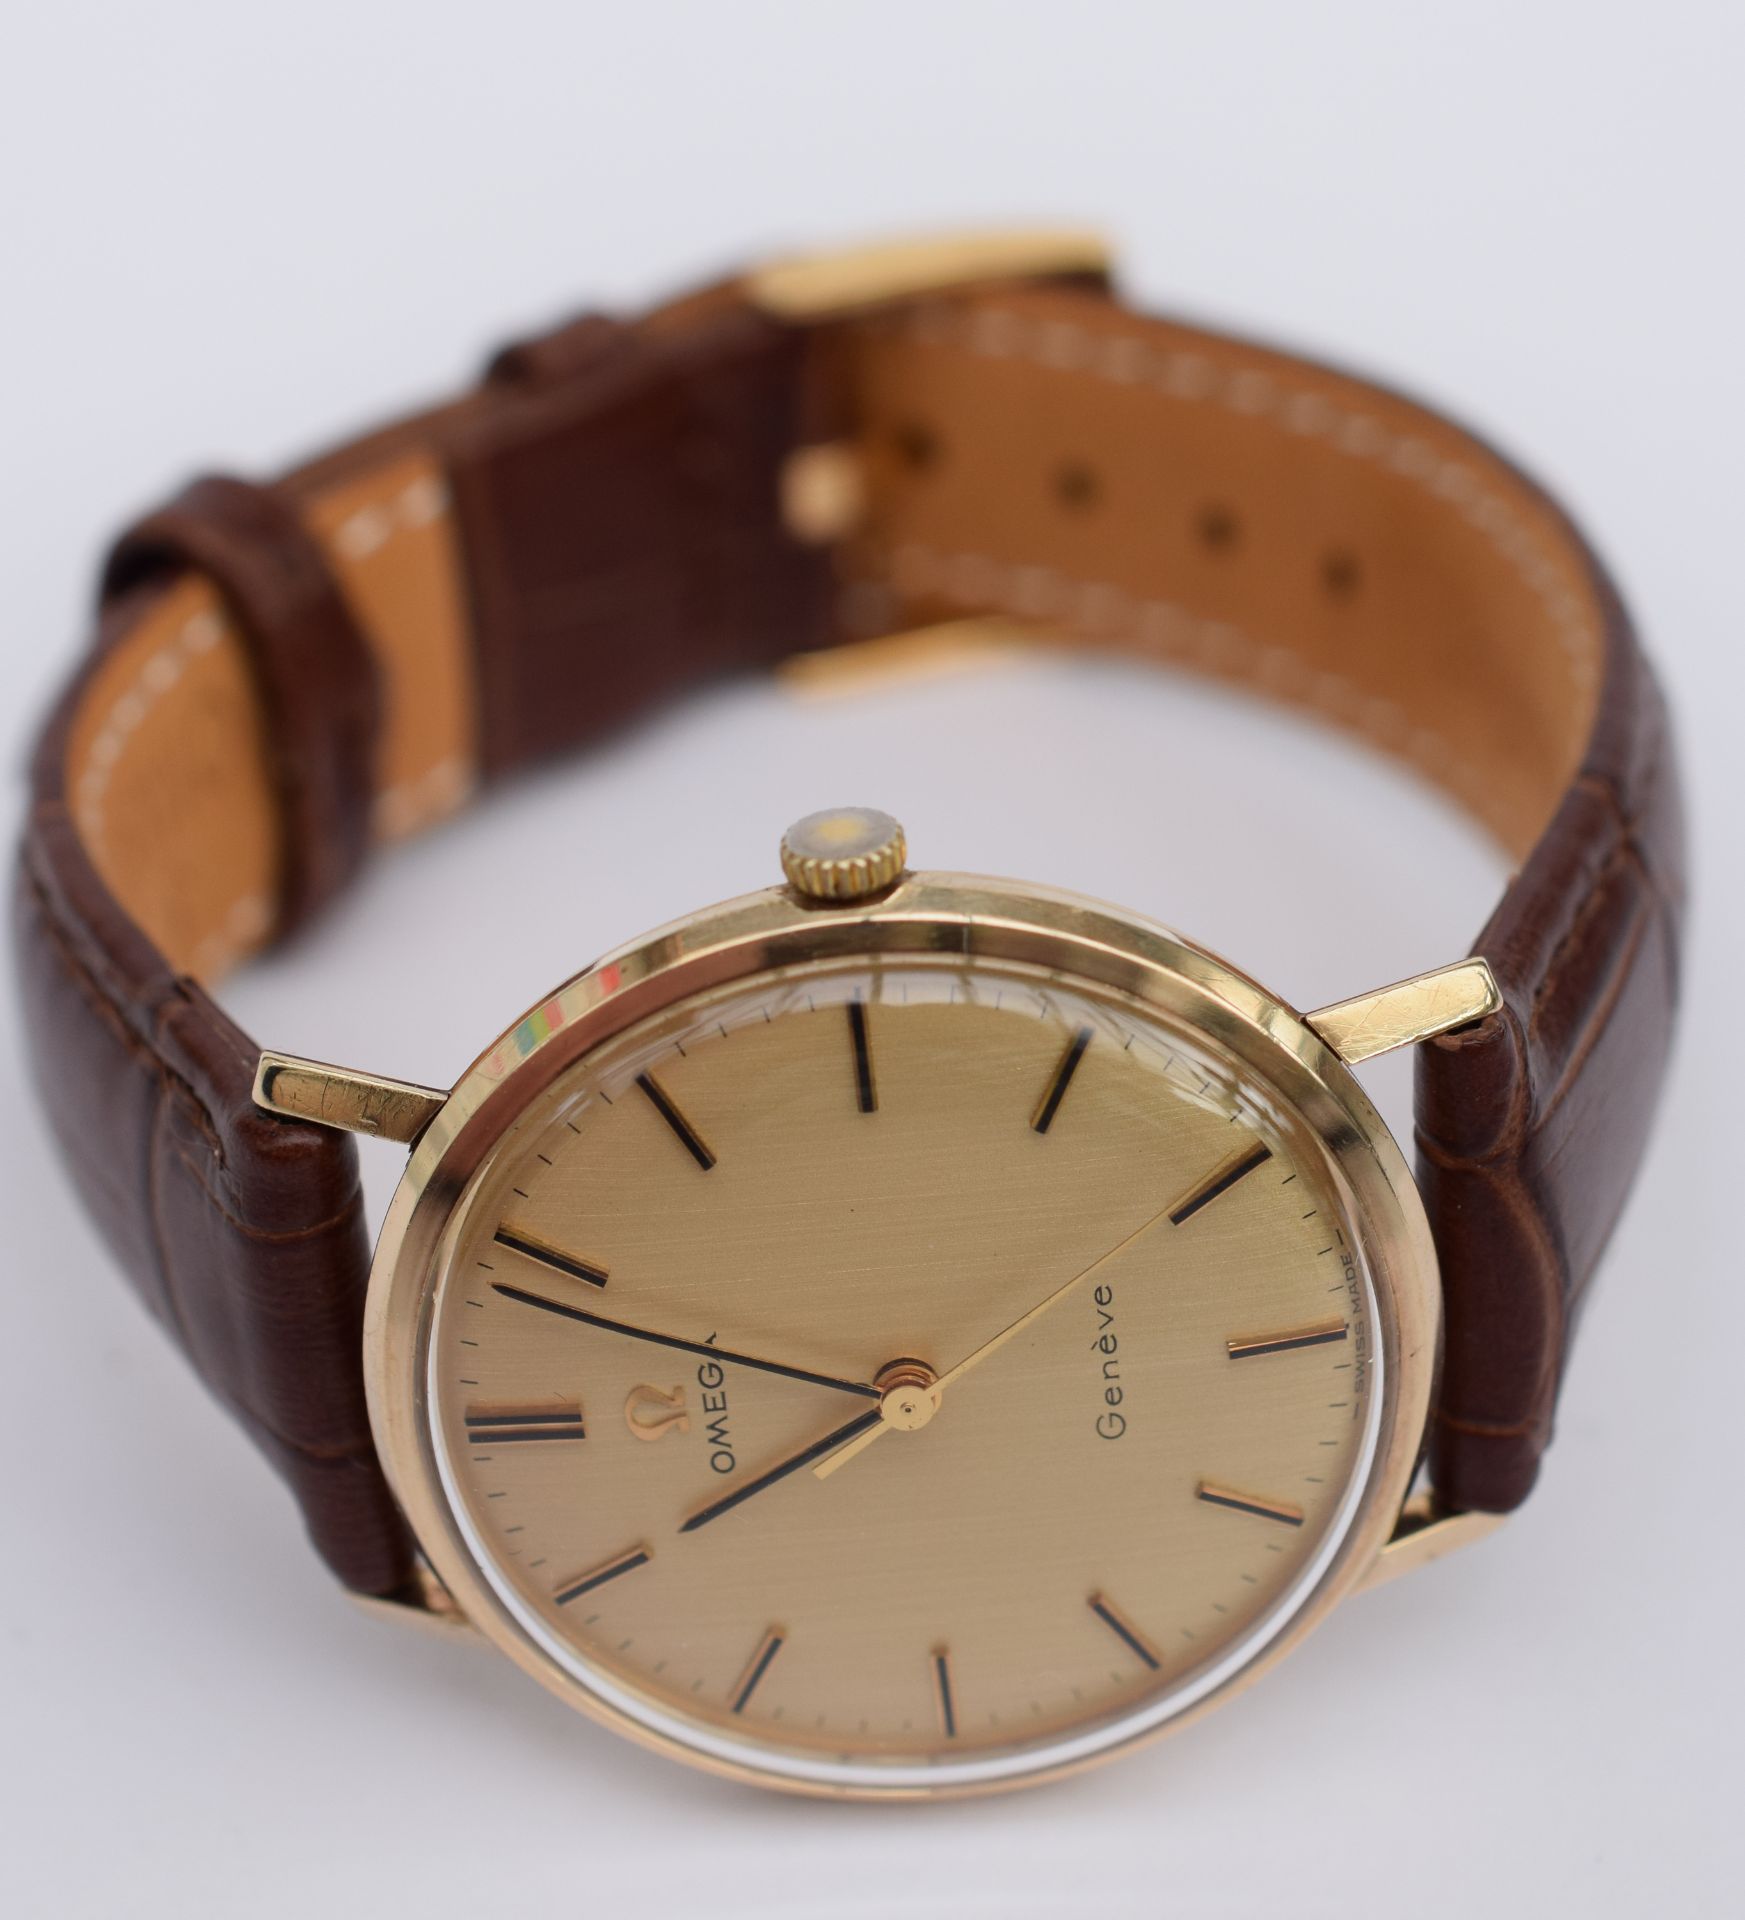 Omega Geneve 9ct Solid Gold 601 calibre Gentleman's Wristwatch - Image 7 of 9